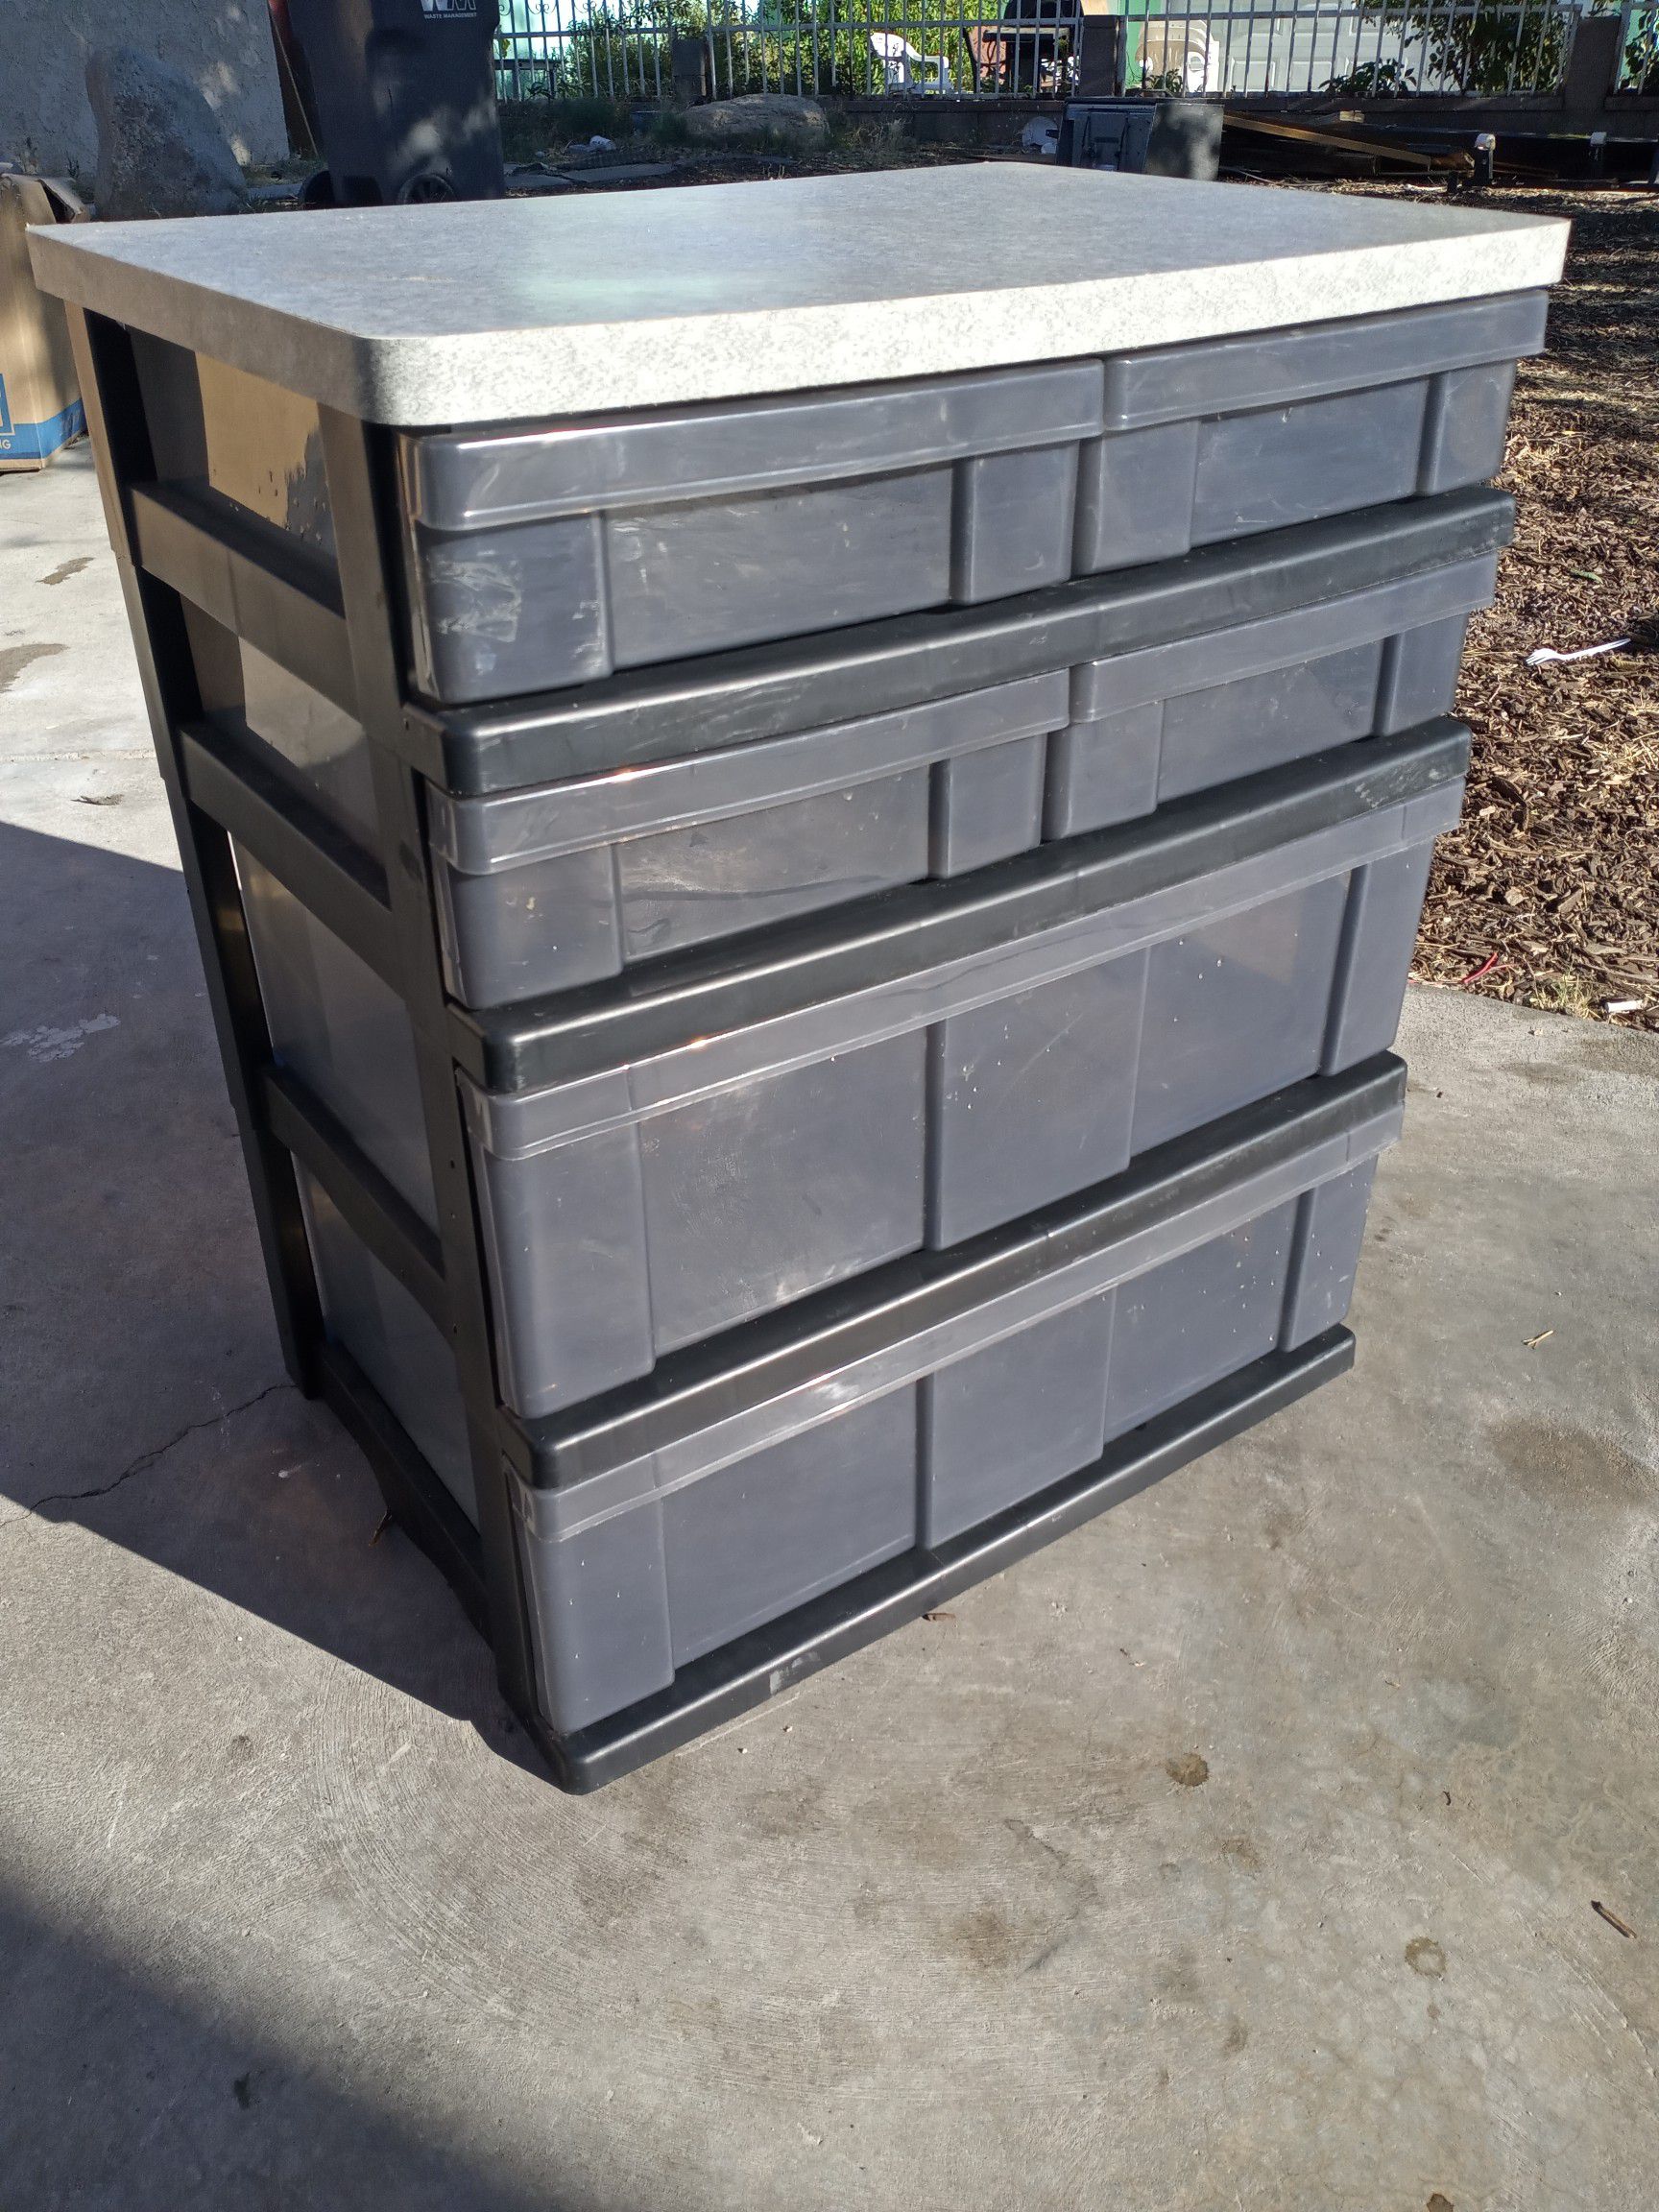 New Plastic Rubber Made Drawers With Six Shelves.